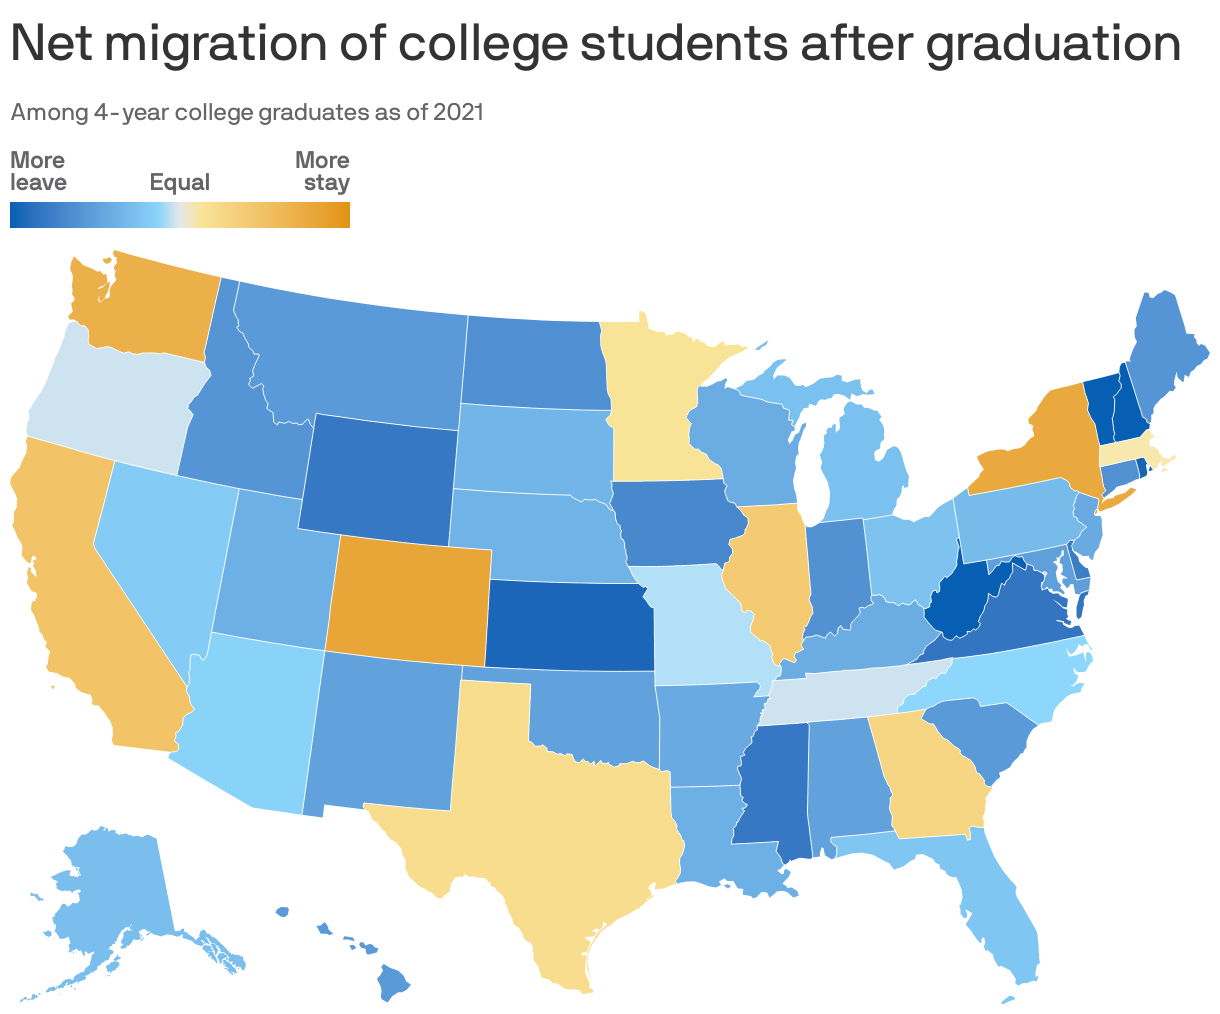 Net migration of college students after graduation